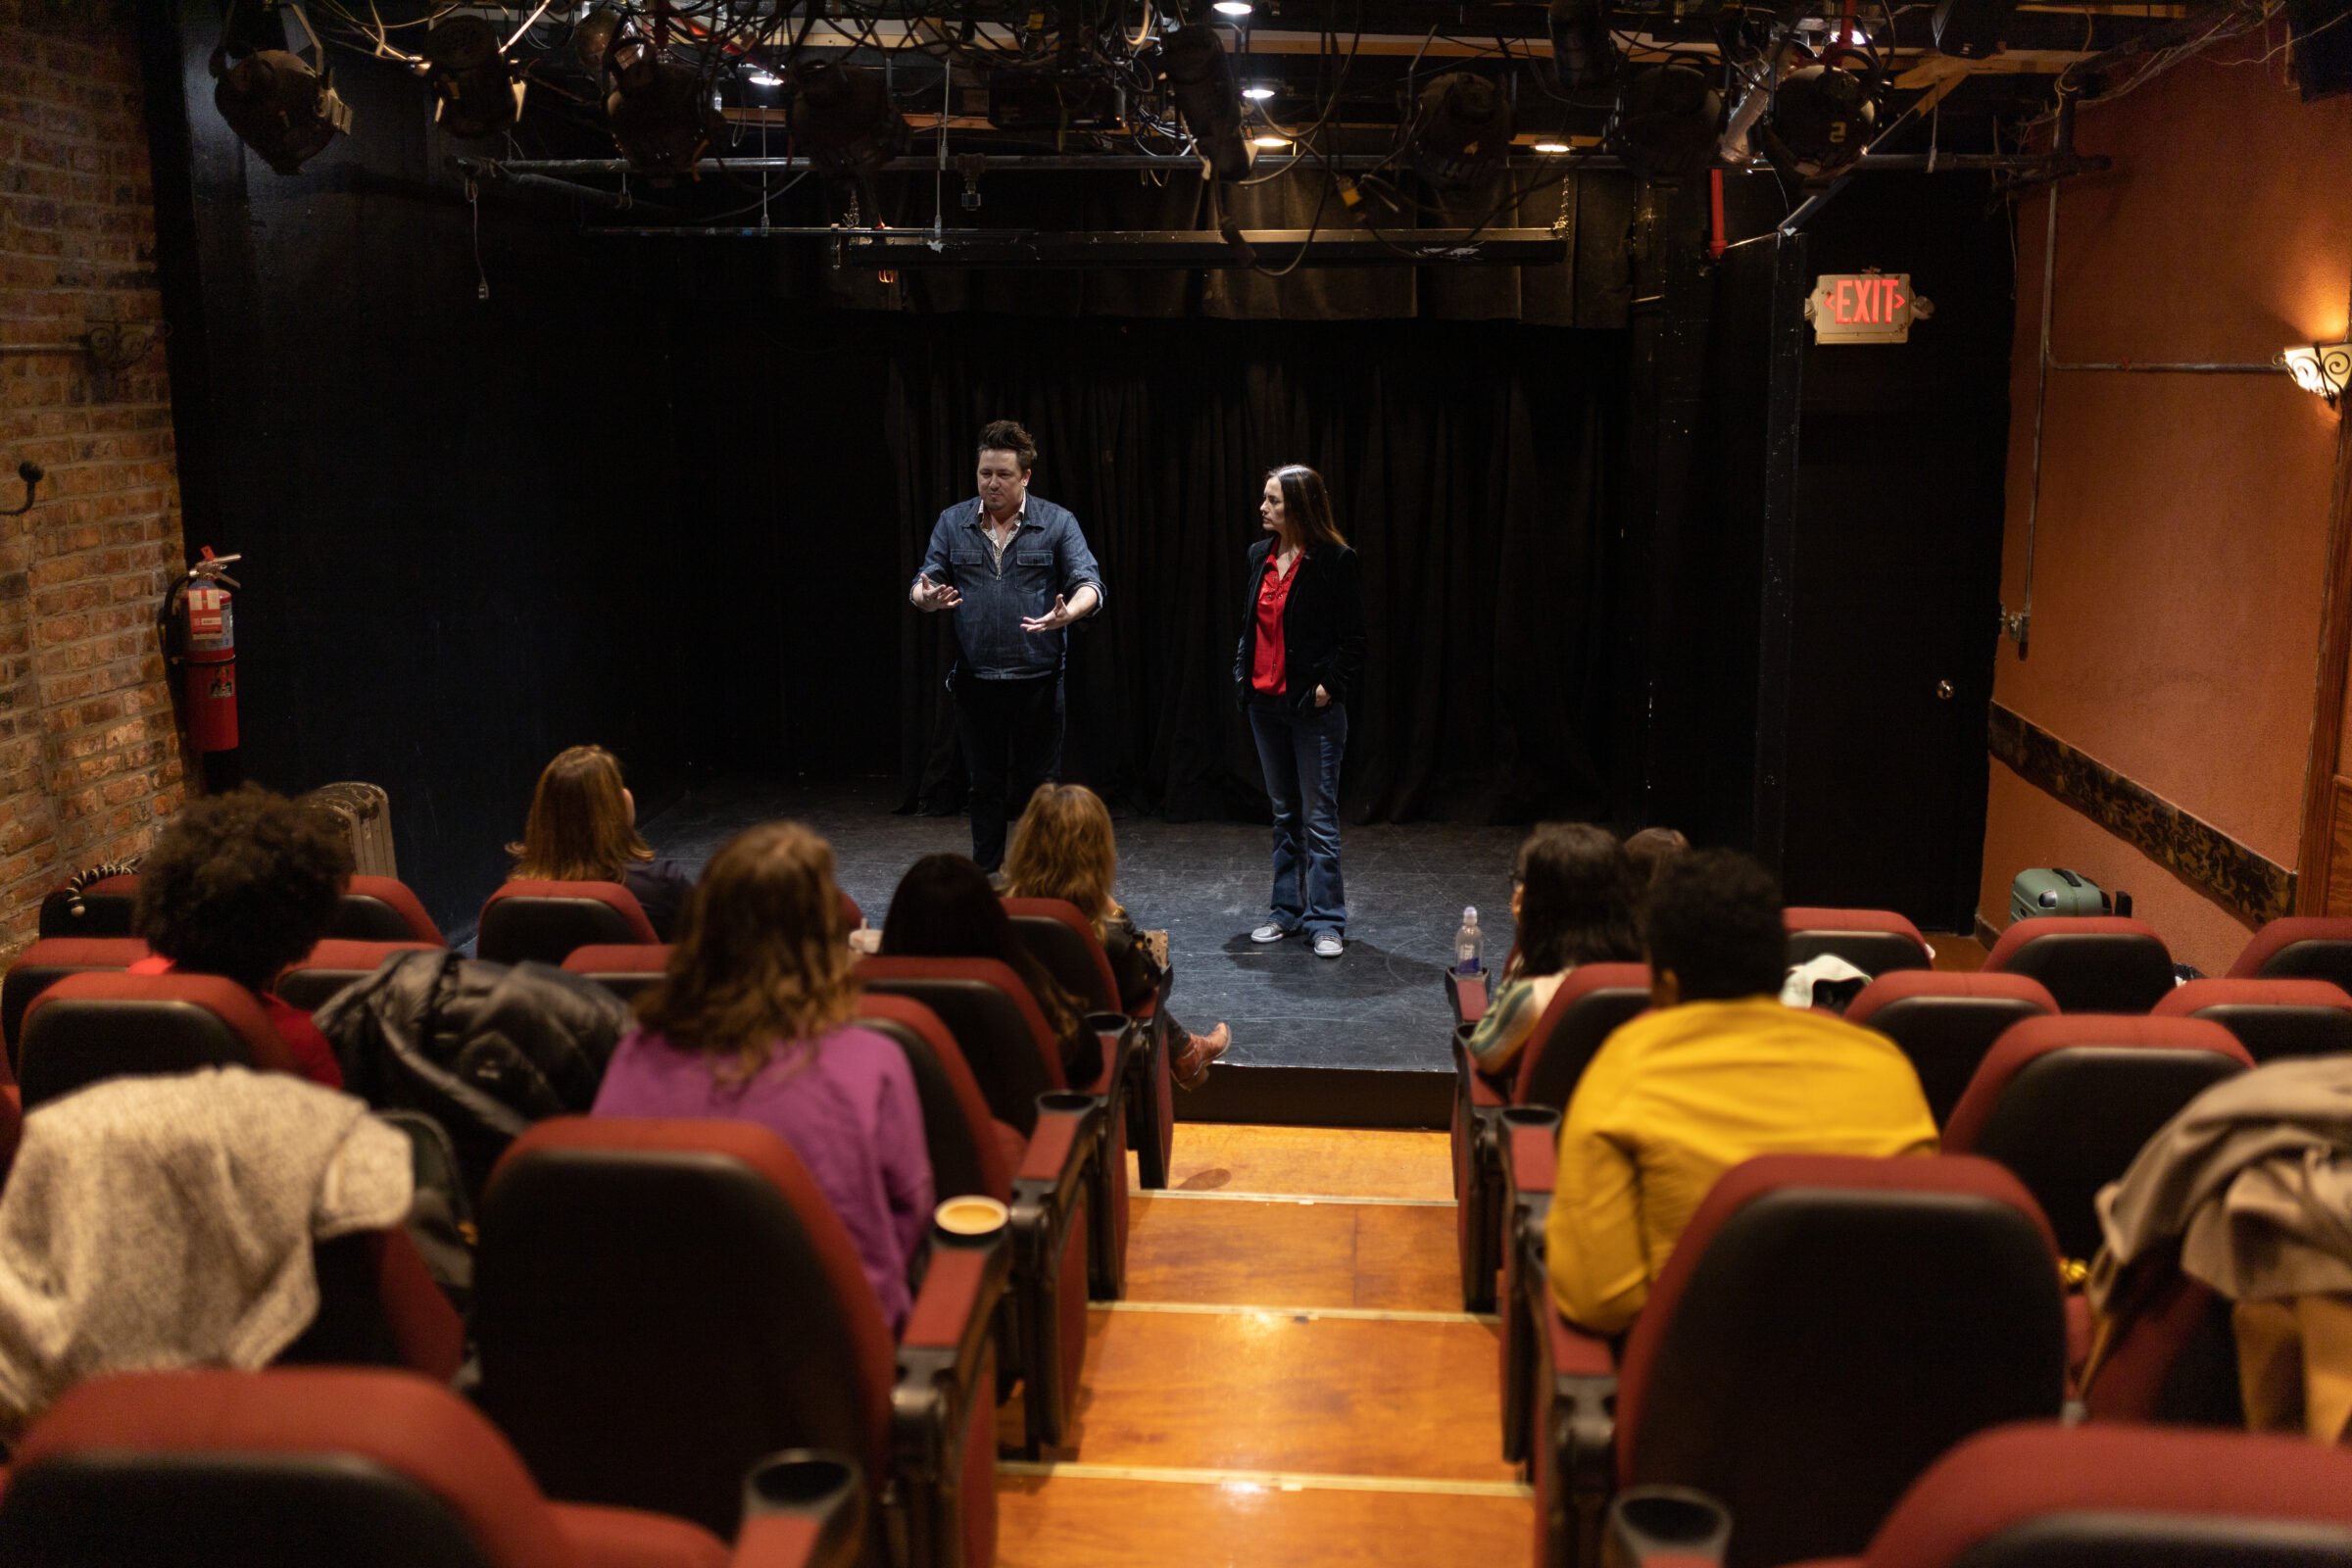 An image from the back of a small theater. People are in the audience. Two people are on stage. One of them is teaching.